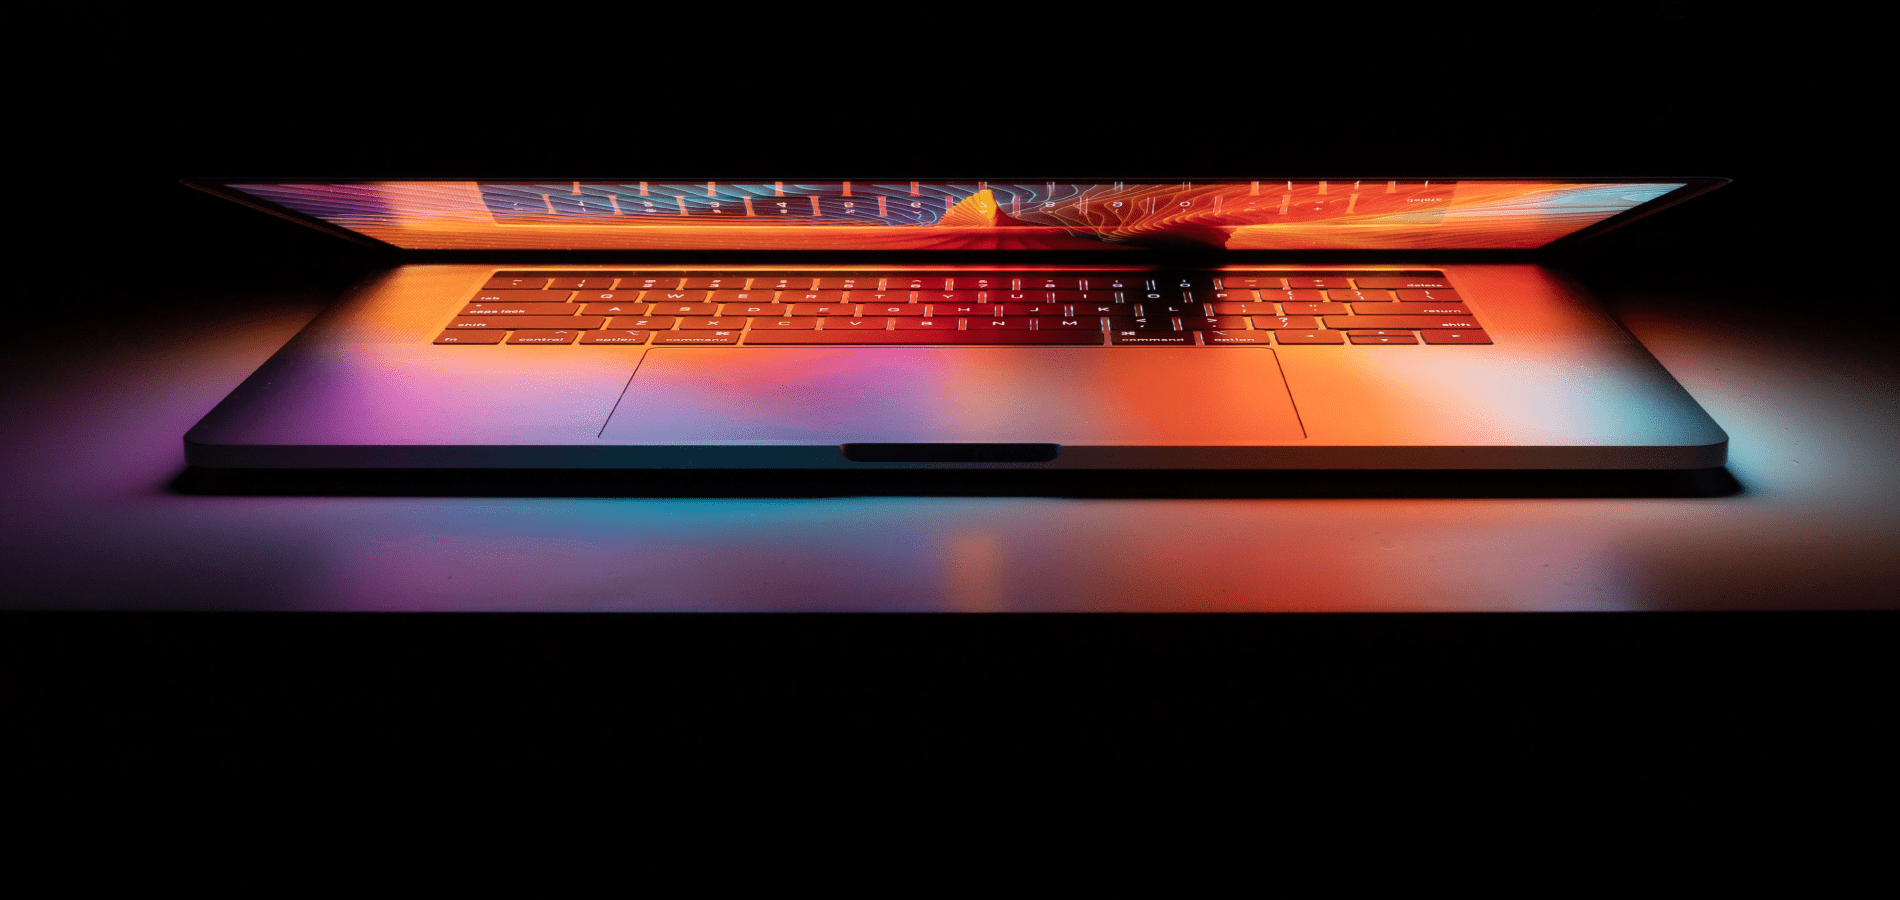 Laptop with colorful glow